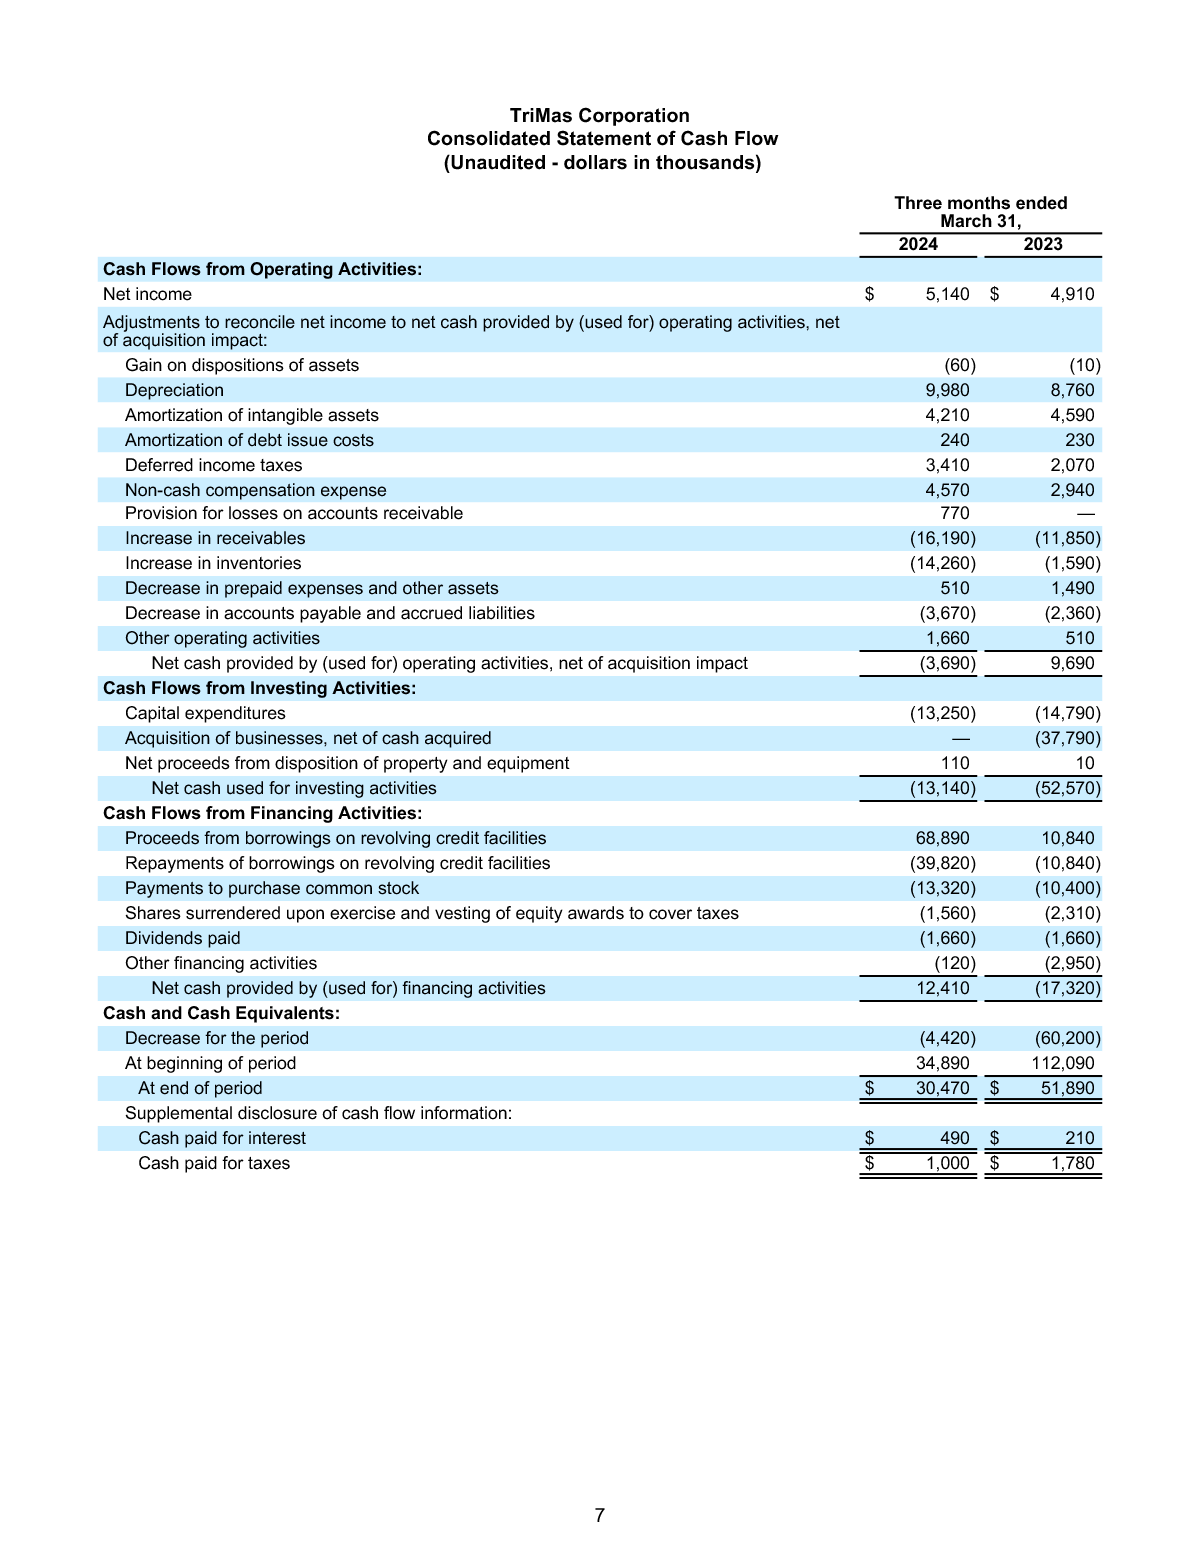 FINAL 4 30 24 Q1 Earnings Release page 7 image